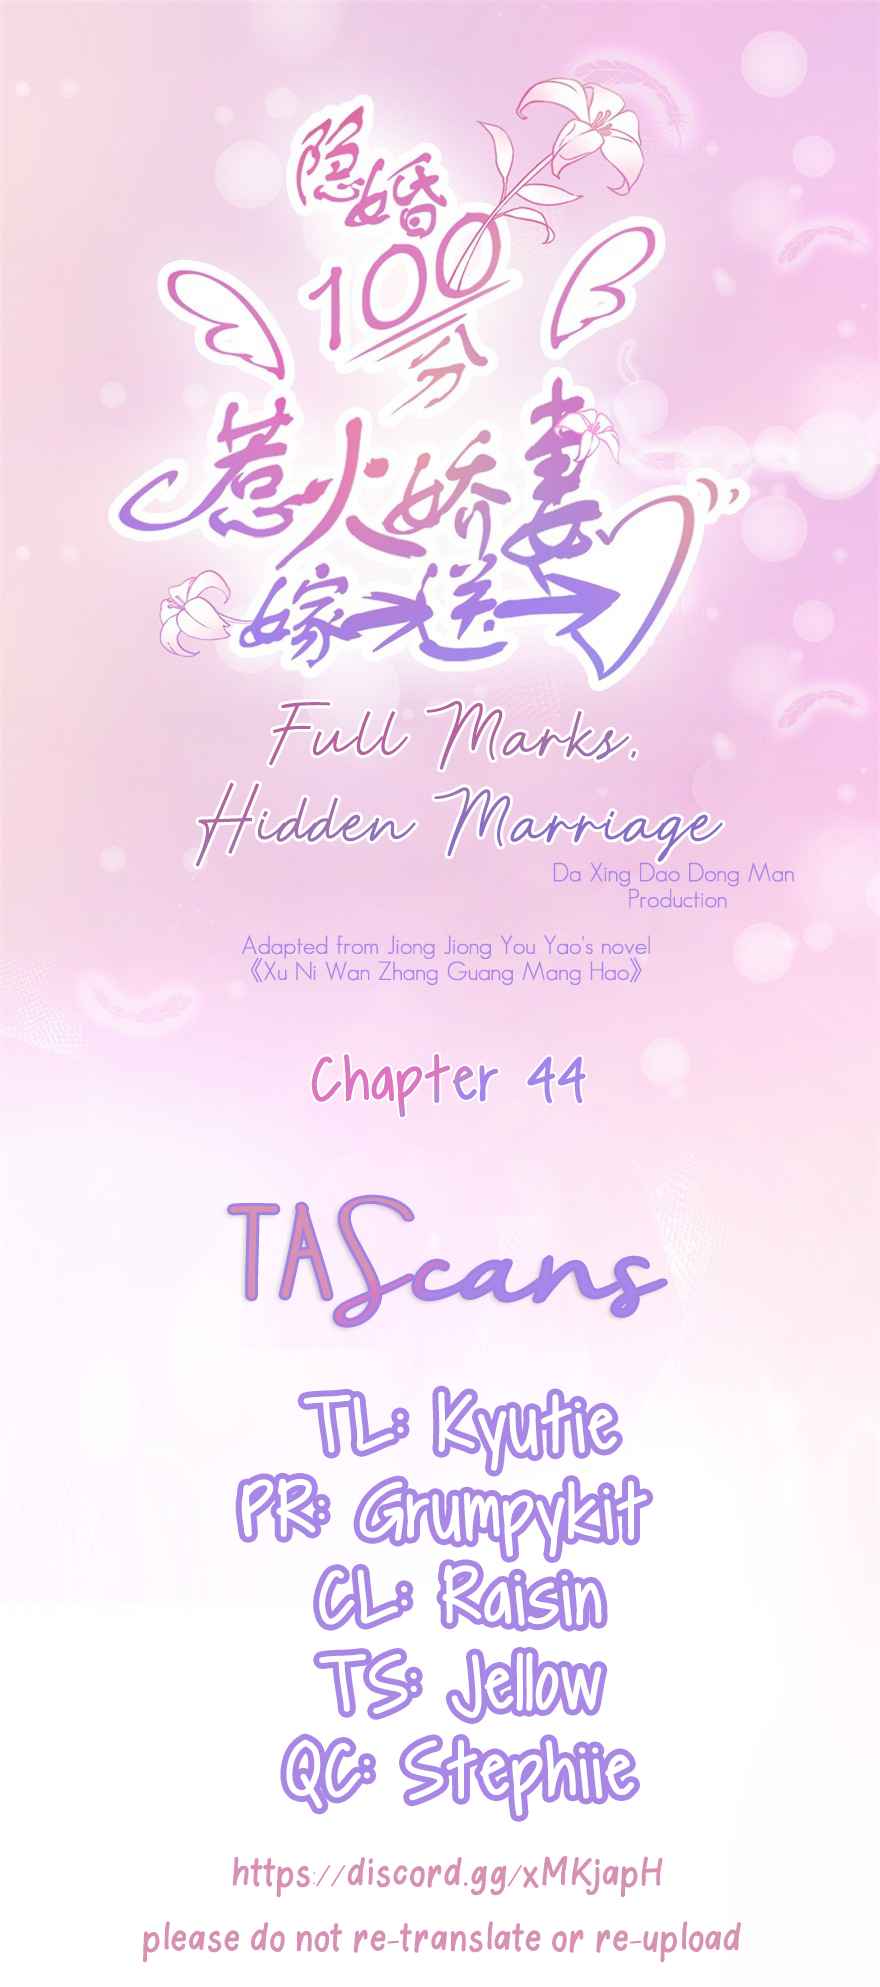 Full Marks, Hidden Marriage Ch. 44 Jia Qing Qing, just withdraw from the Entertainment Circle